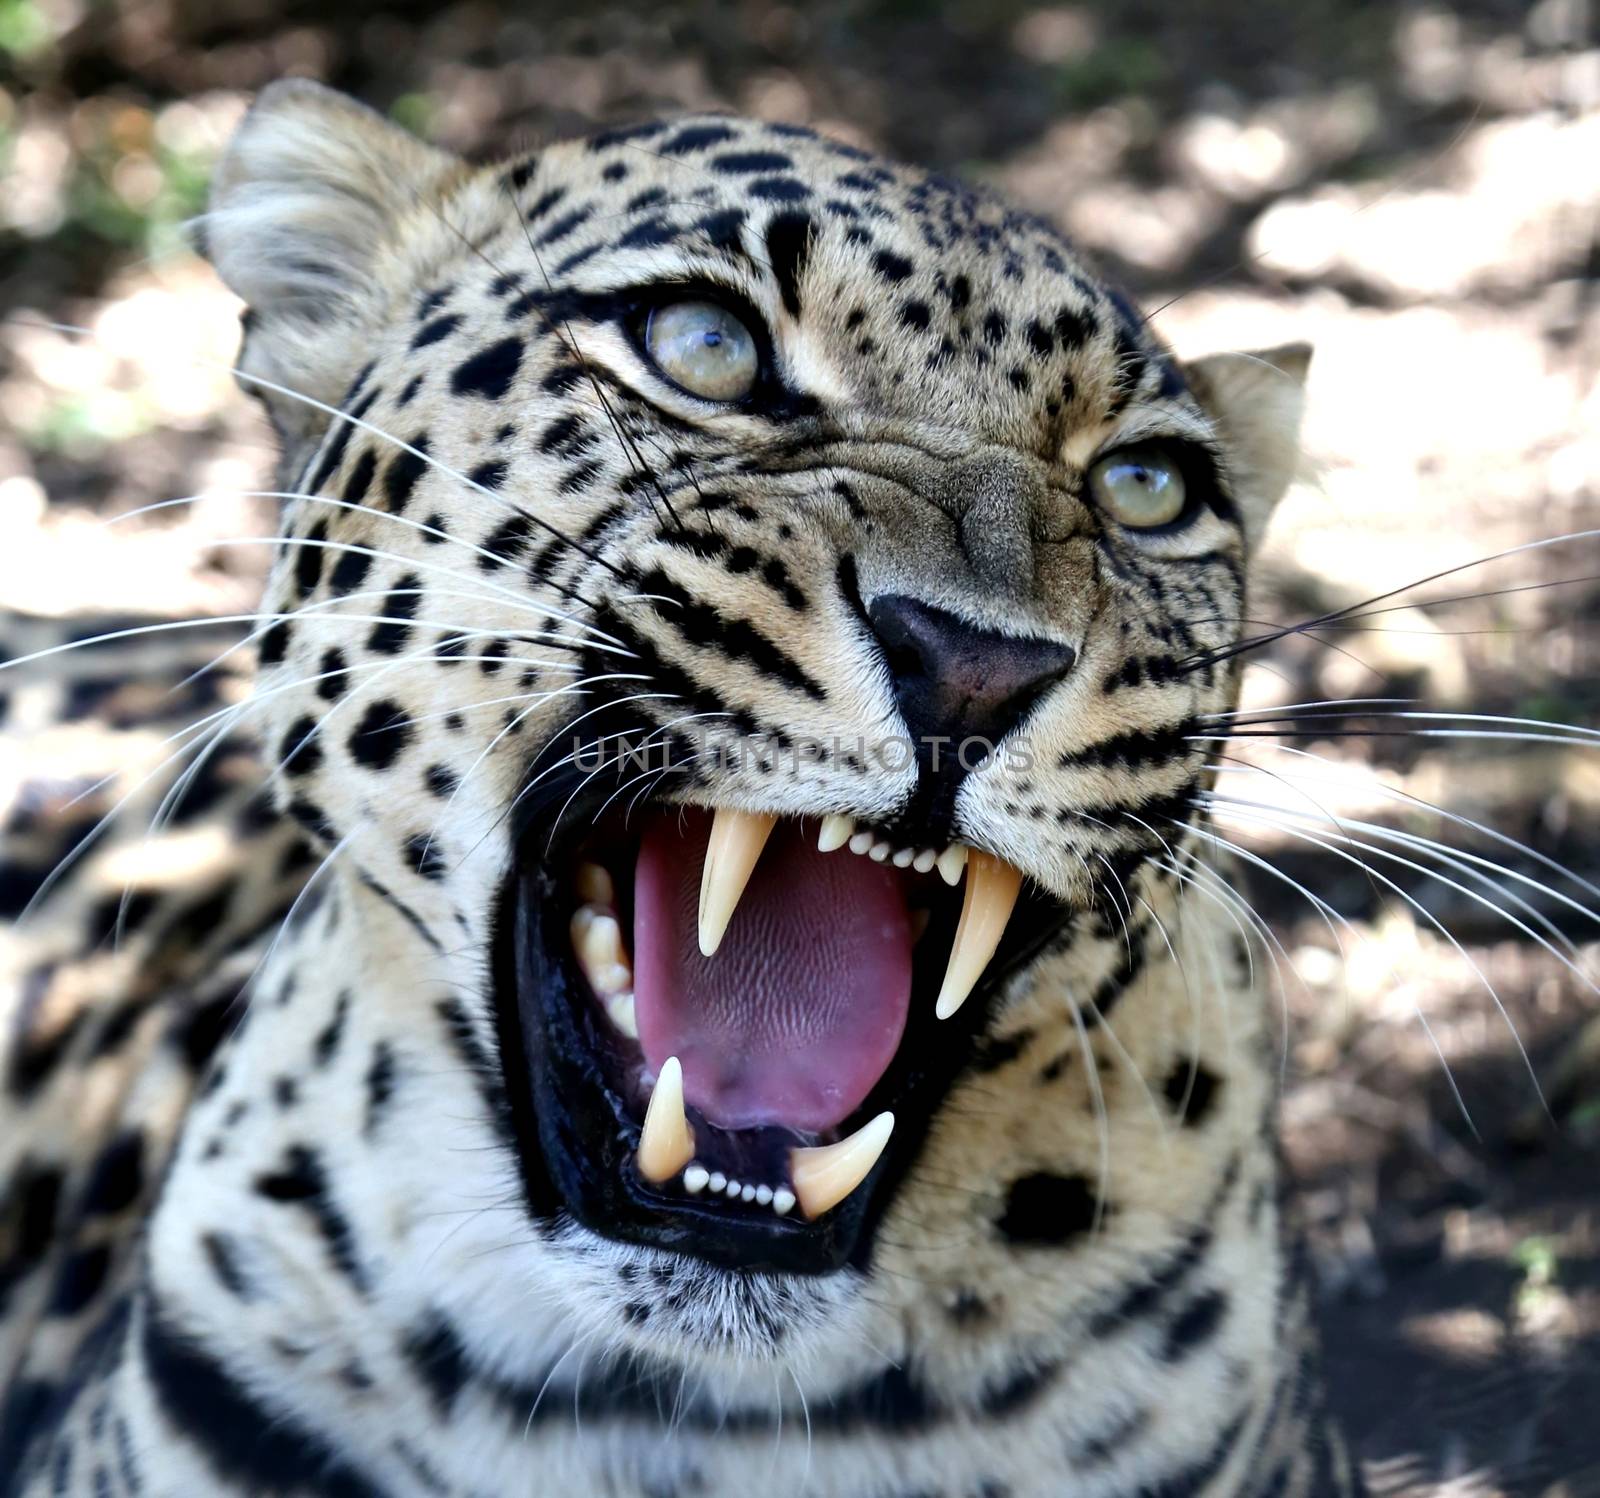 Snarling Leopard with Huge Teeth by fouroaks